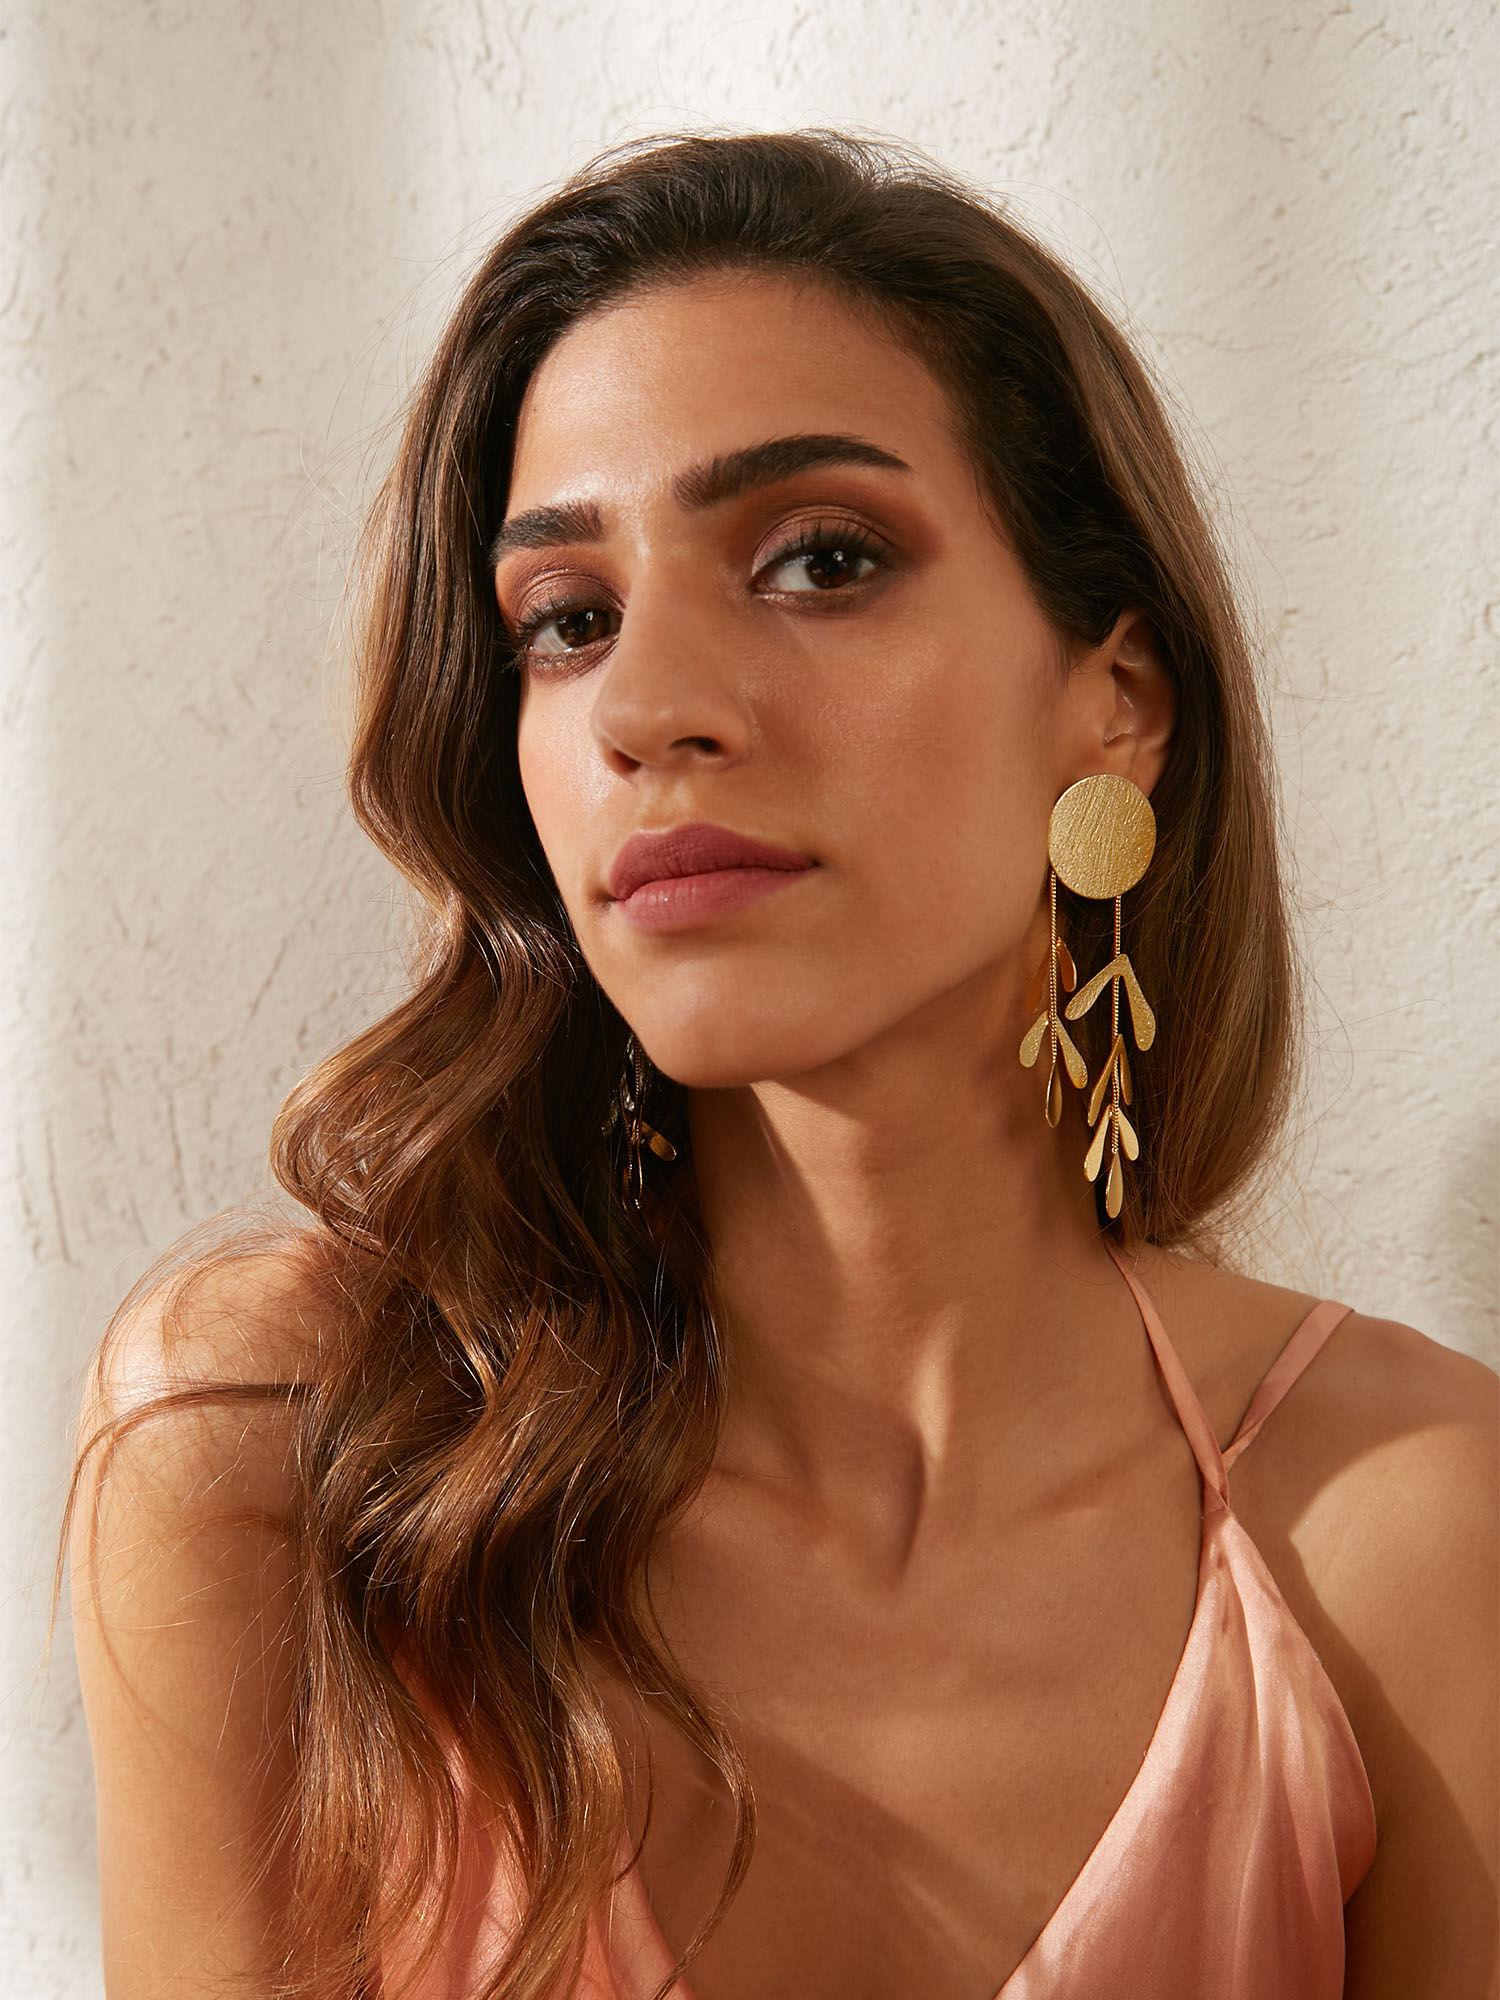 oblong shaped gold-plated earrings